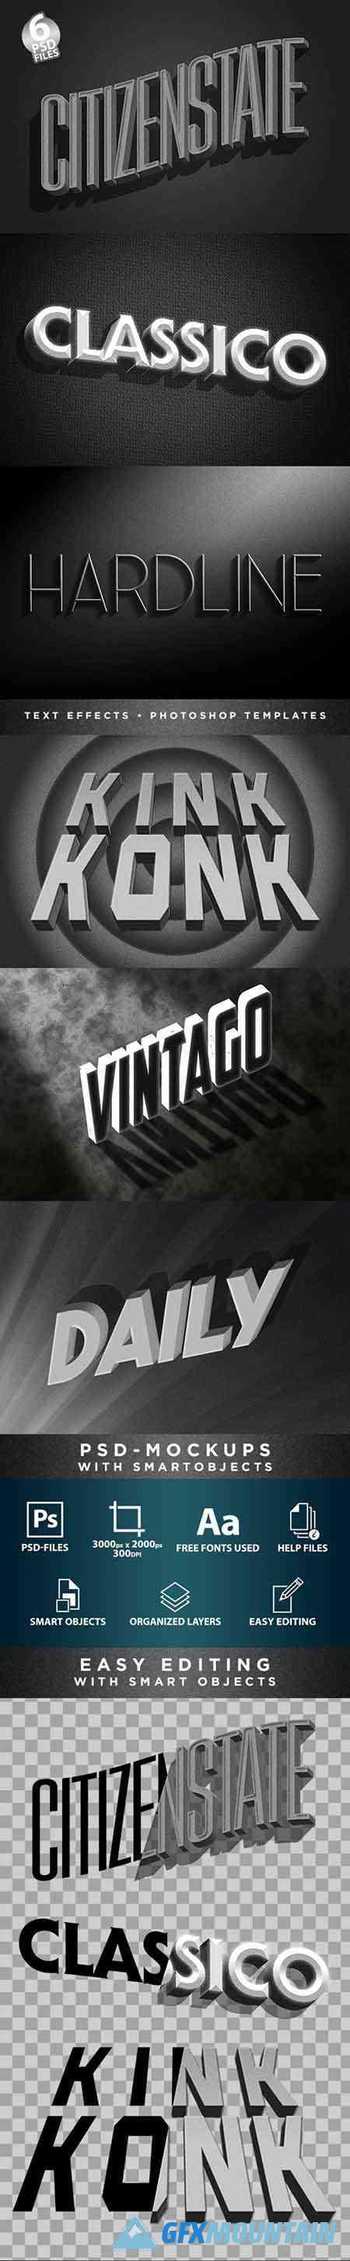 Classic Film Title Cards | 3D Text-Effects/Mockups | Template-Package 29828400